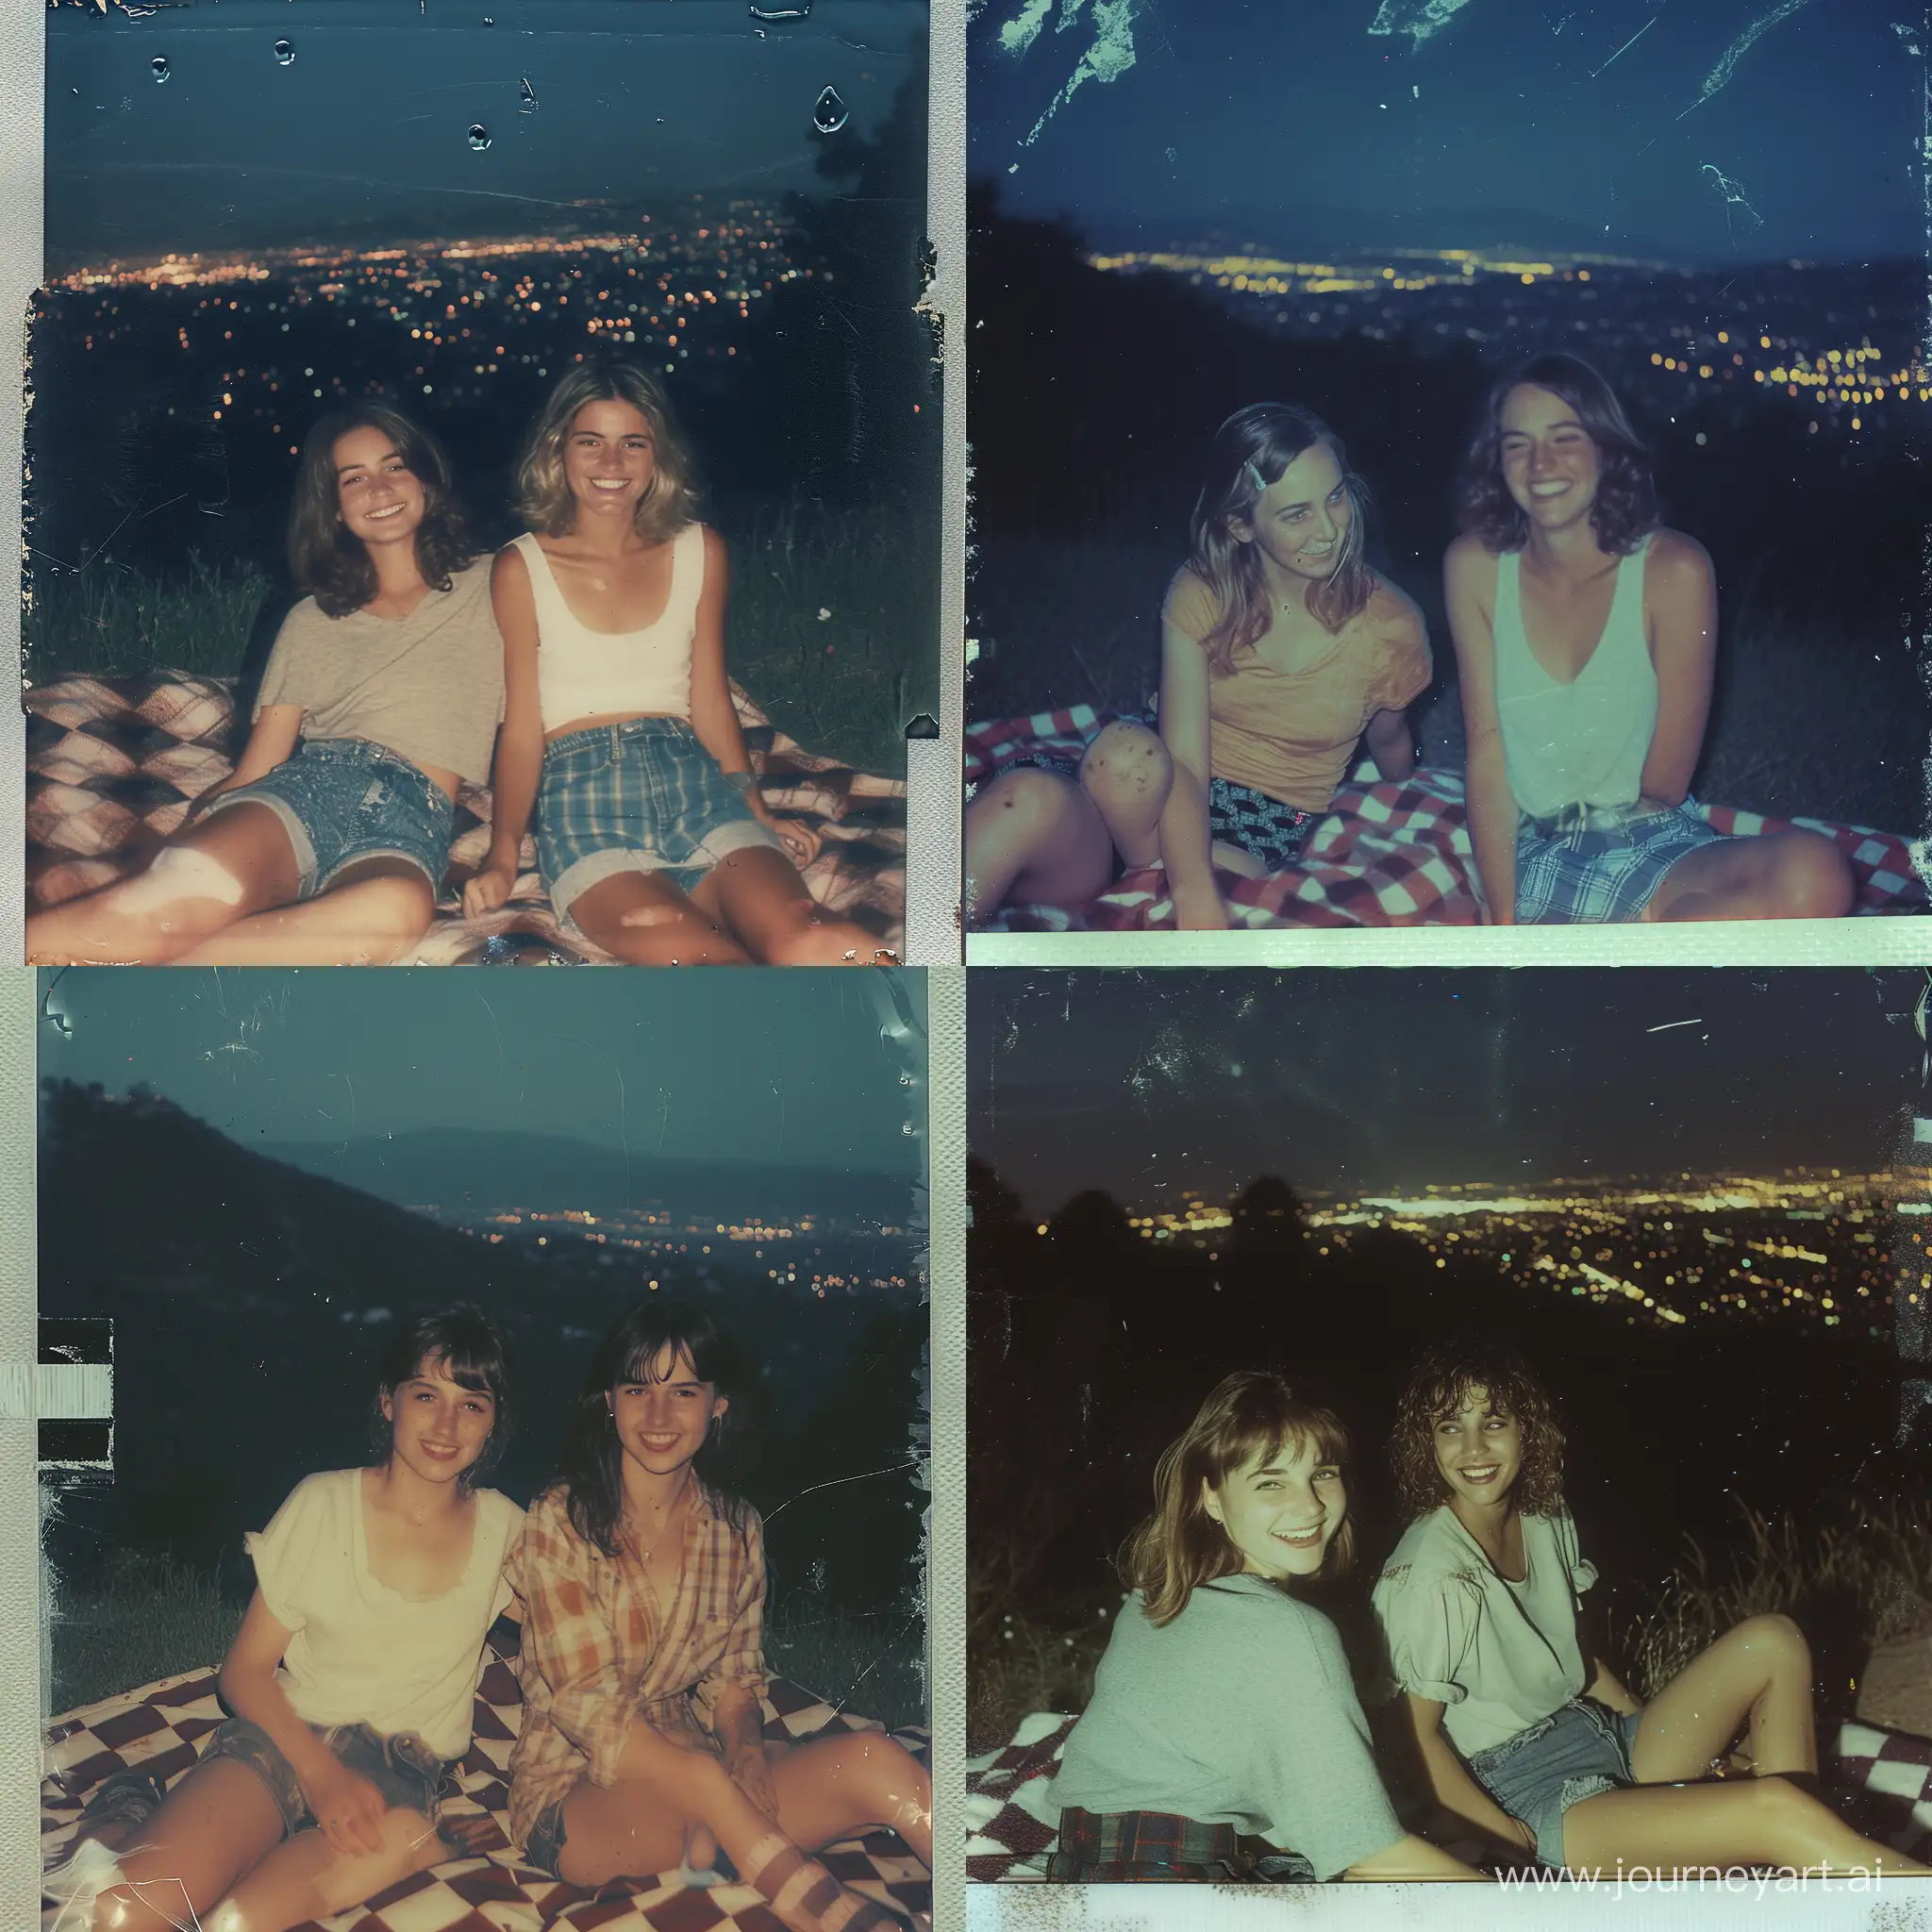 candid 90s flash polaroid photo with 35mm iso 200, scratches and dust, chromatic aberration, and drippy effect. A girl with average features smiling sitting on a checkered blanket at night with her friend, city lights in the valley